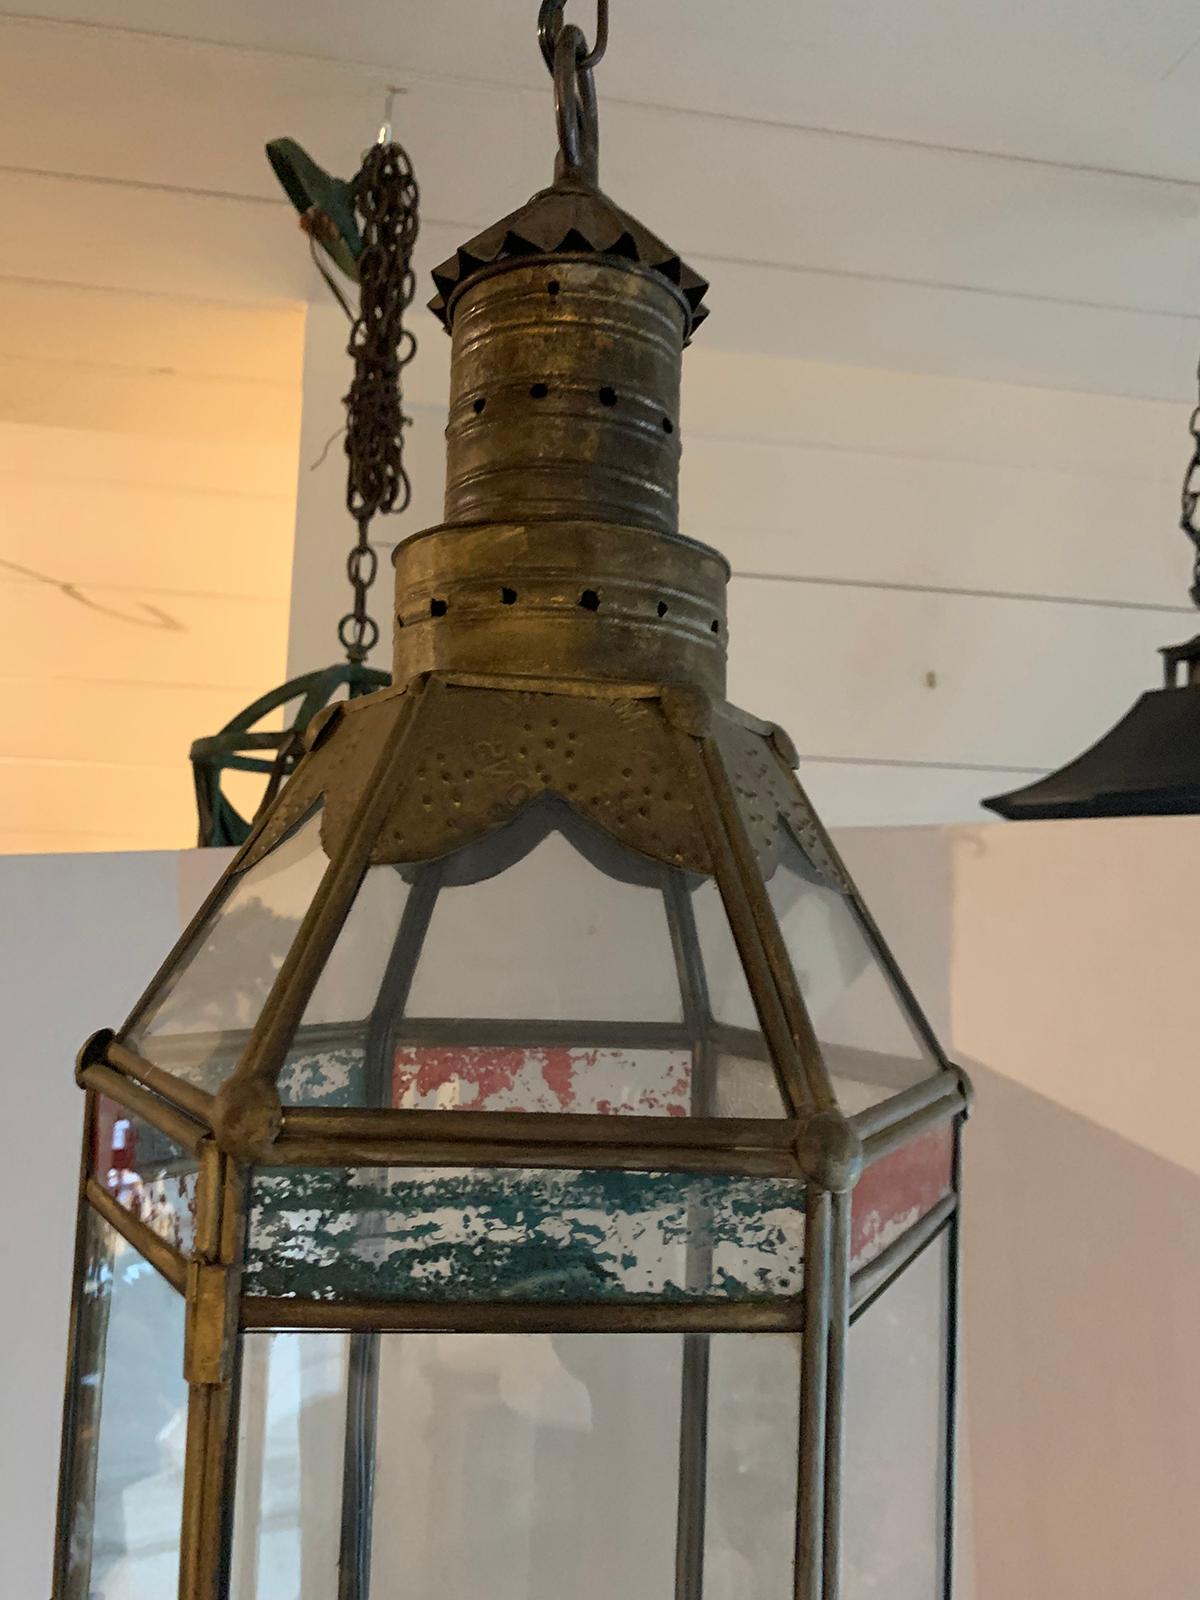 Pair of Moroccan style brass and glass lanterns, circa 1920
One light
New wiring.